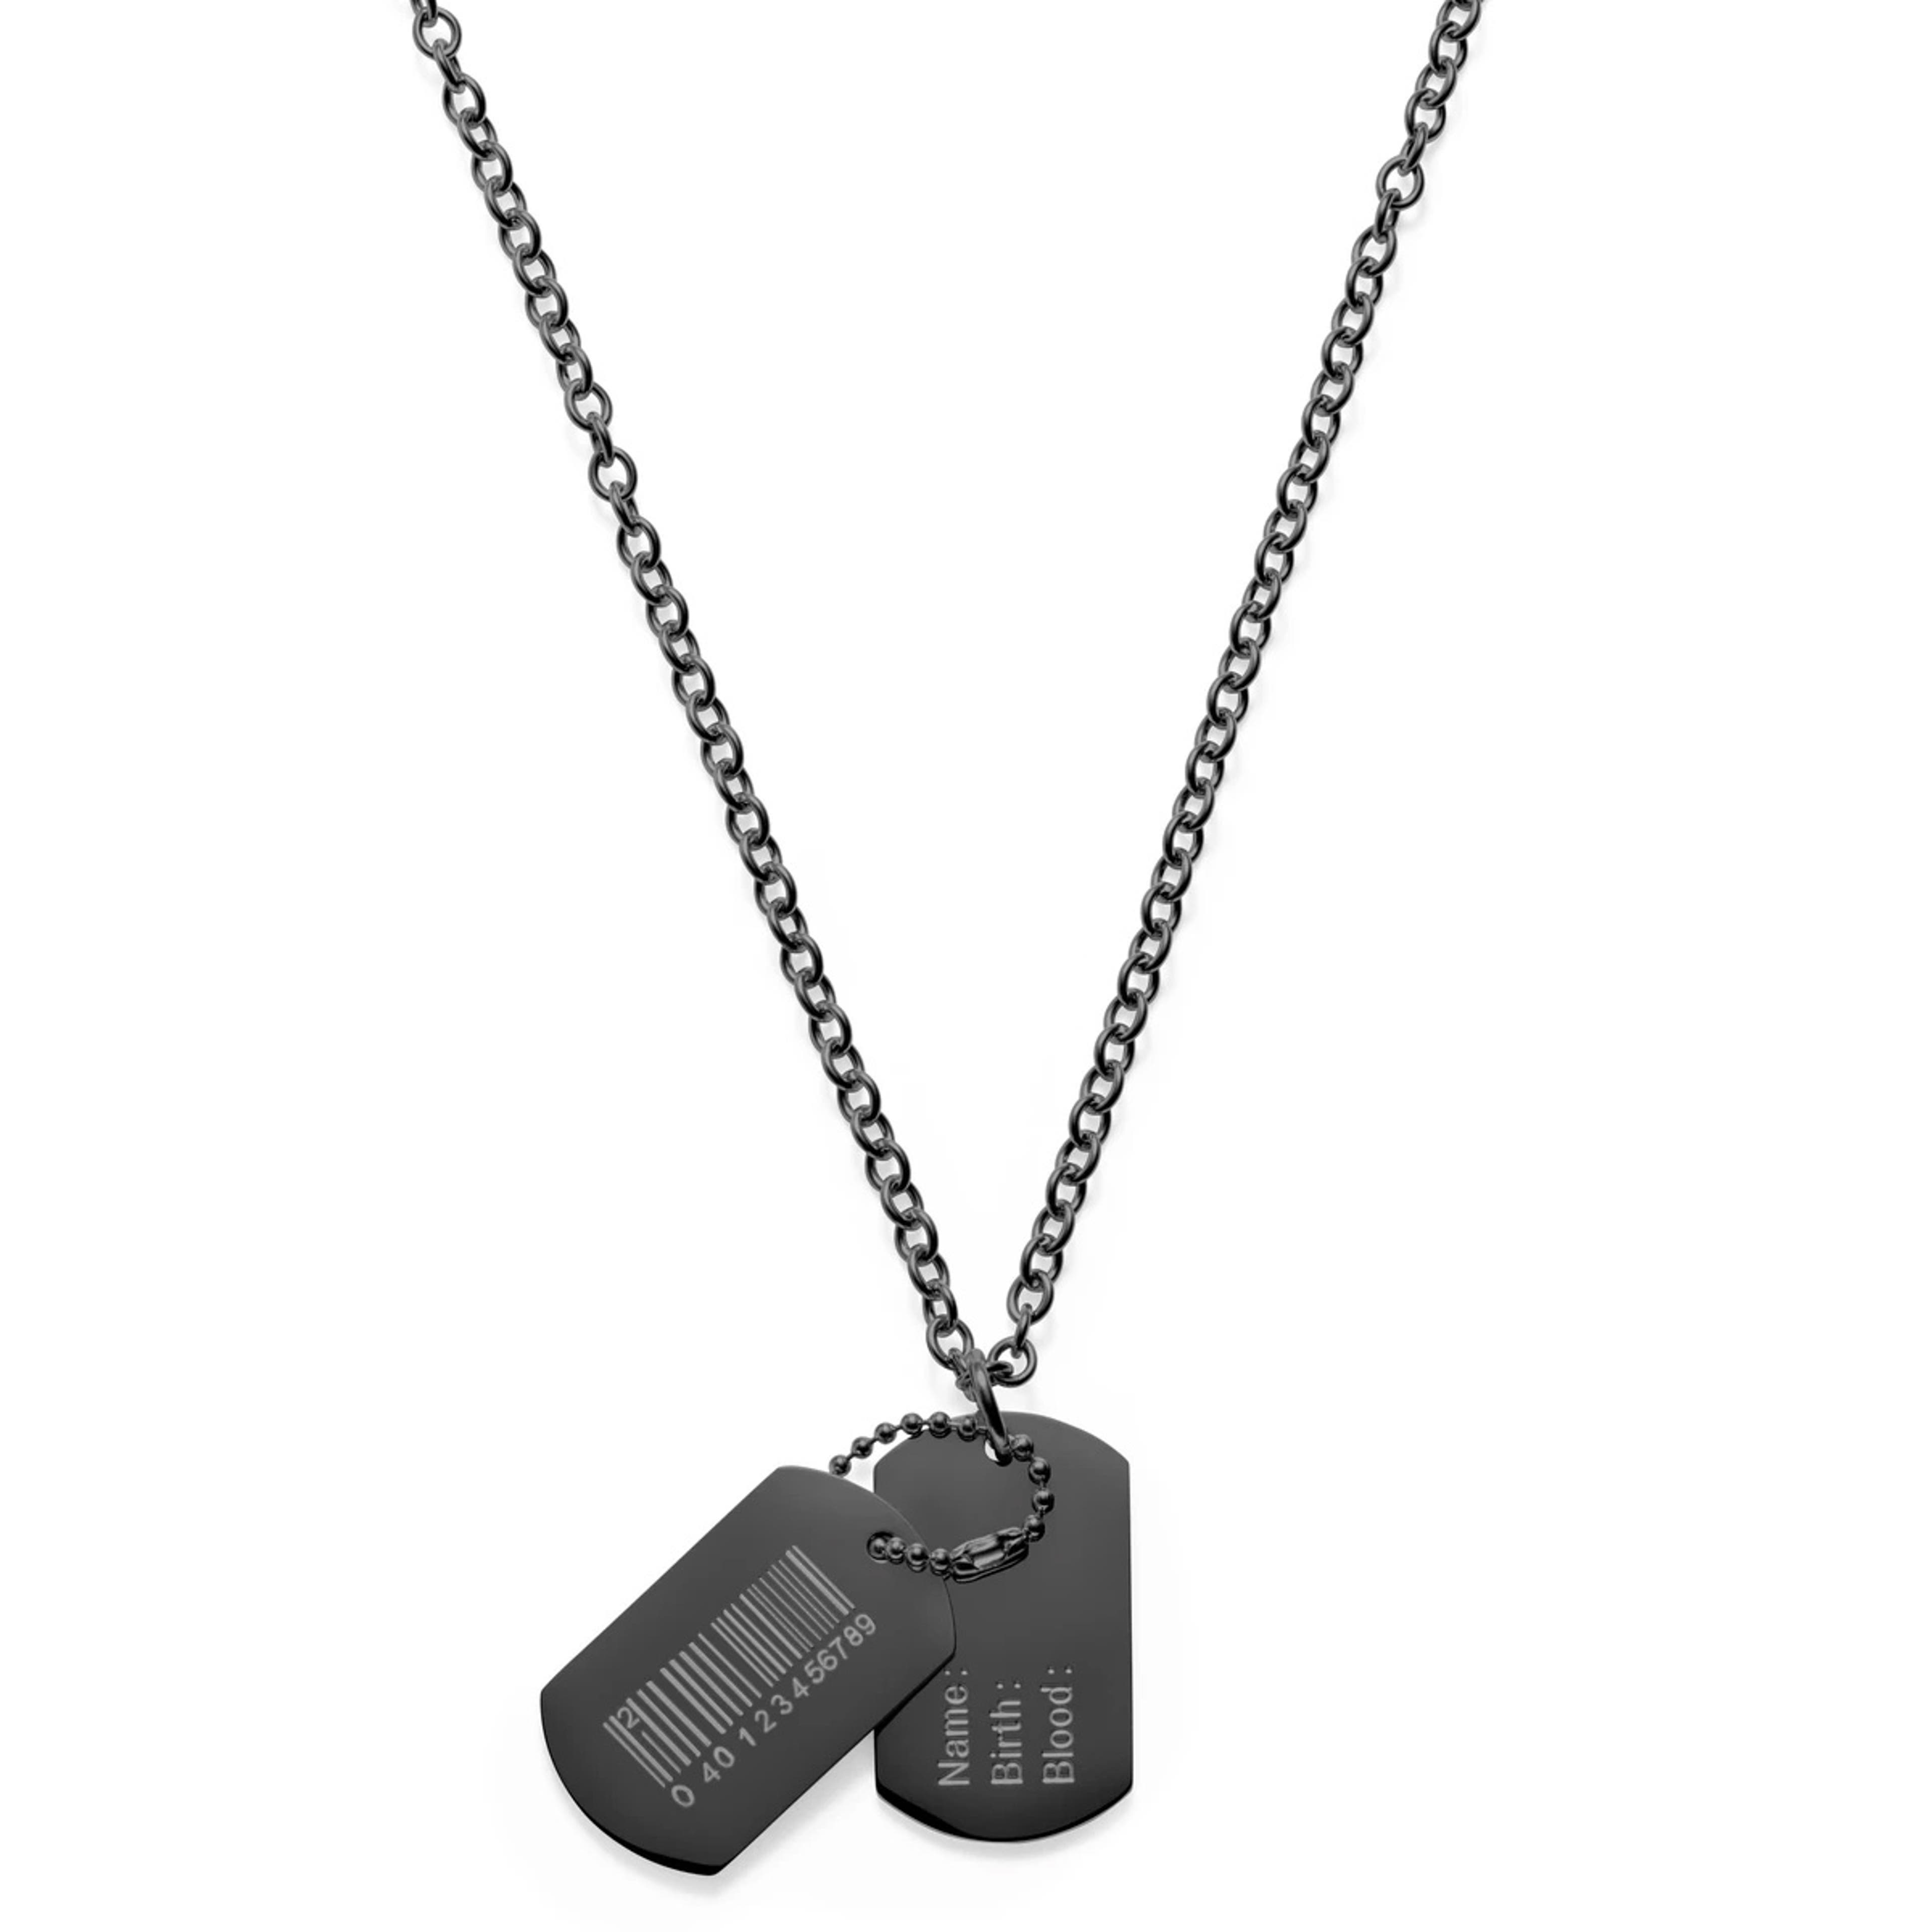 BLING JEWELRY Men's Stainless Steel Black Titanium Dog Tag Pendant Necklace